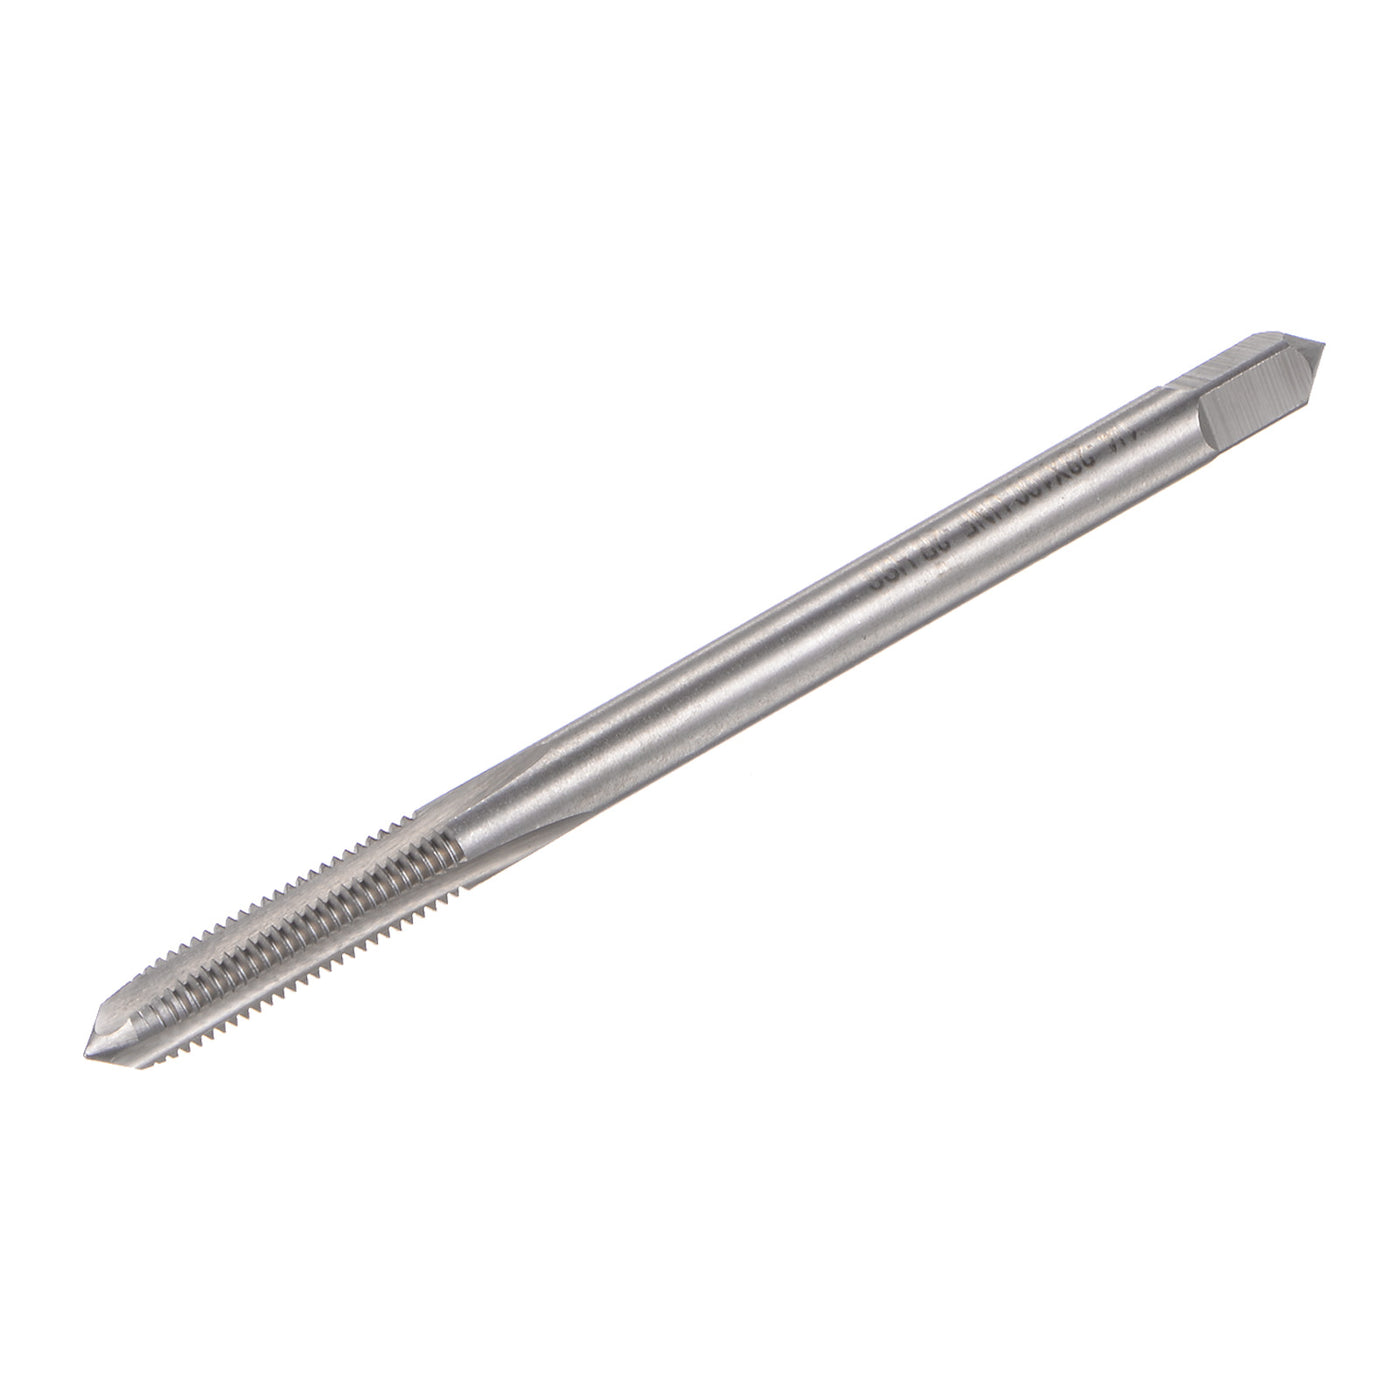 Uxcell Uxcell 1/4-28 UNF High Speed Steel 4" Length 3 Straight Flute Machine Screw Thread Tap